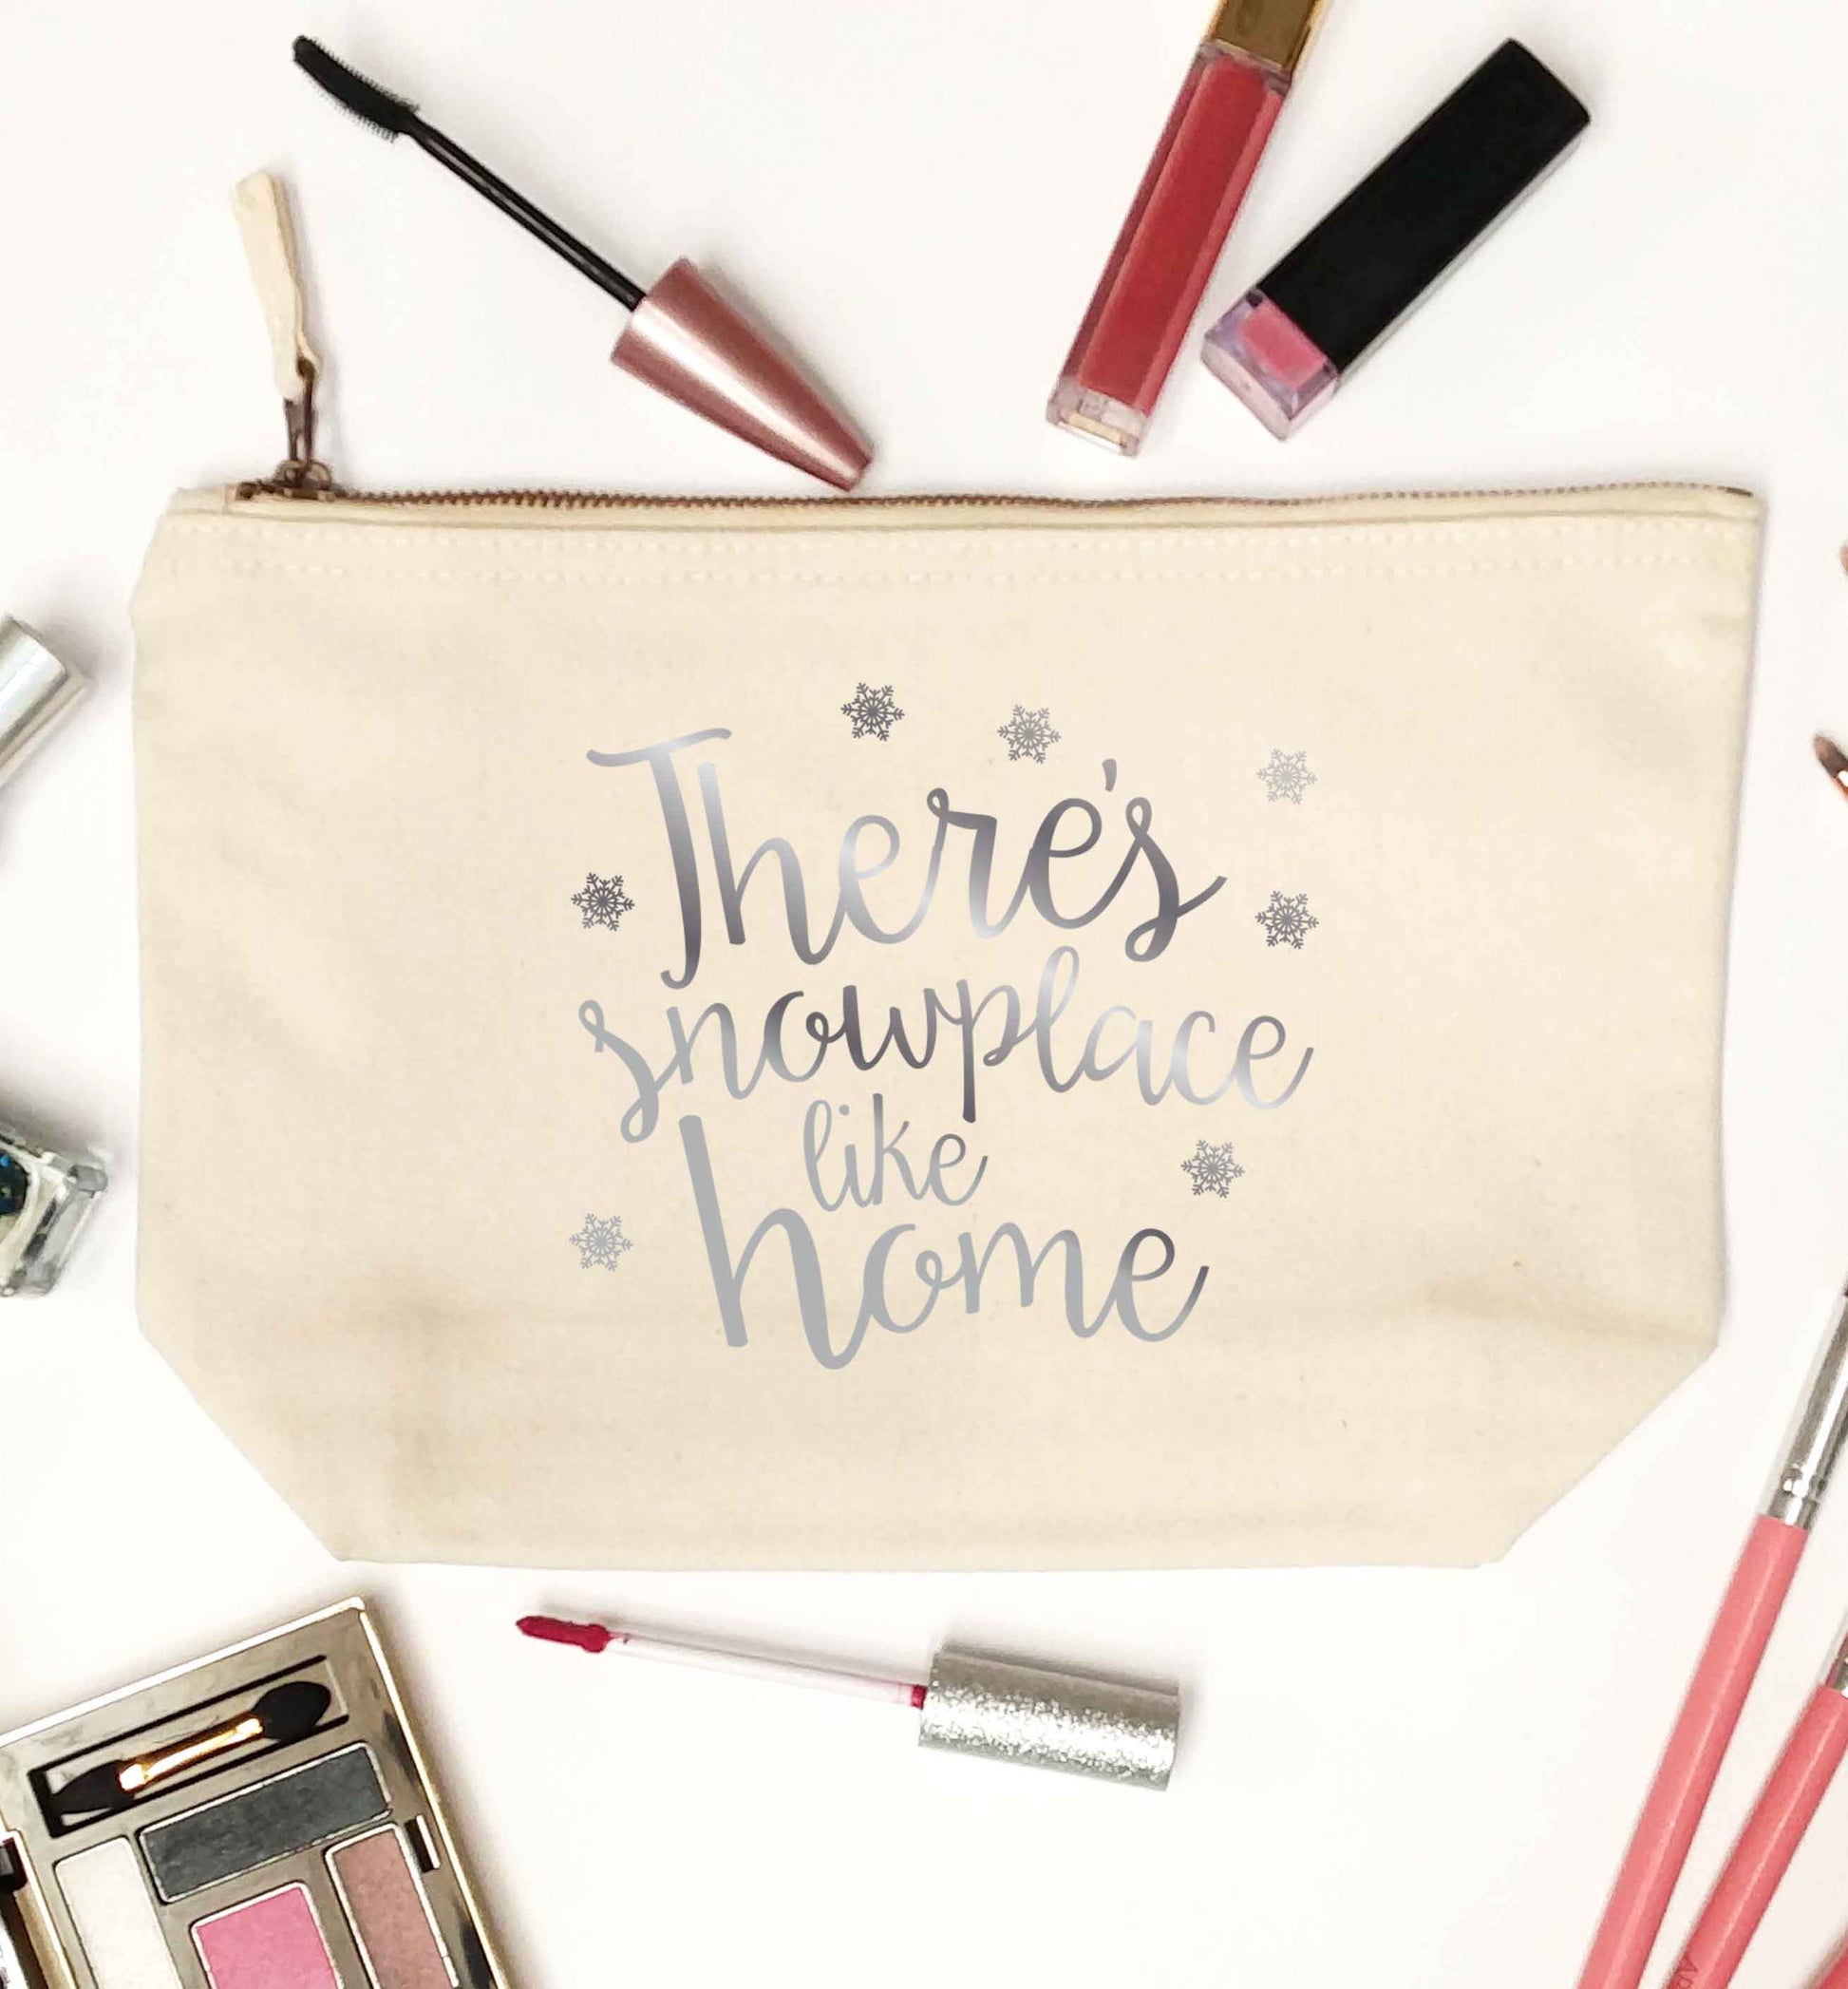 There's snowplace like home - metallic silver natural makeup bag